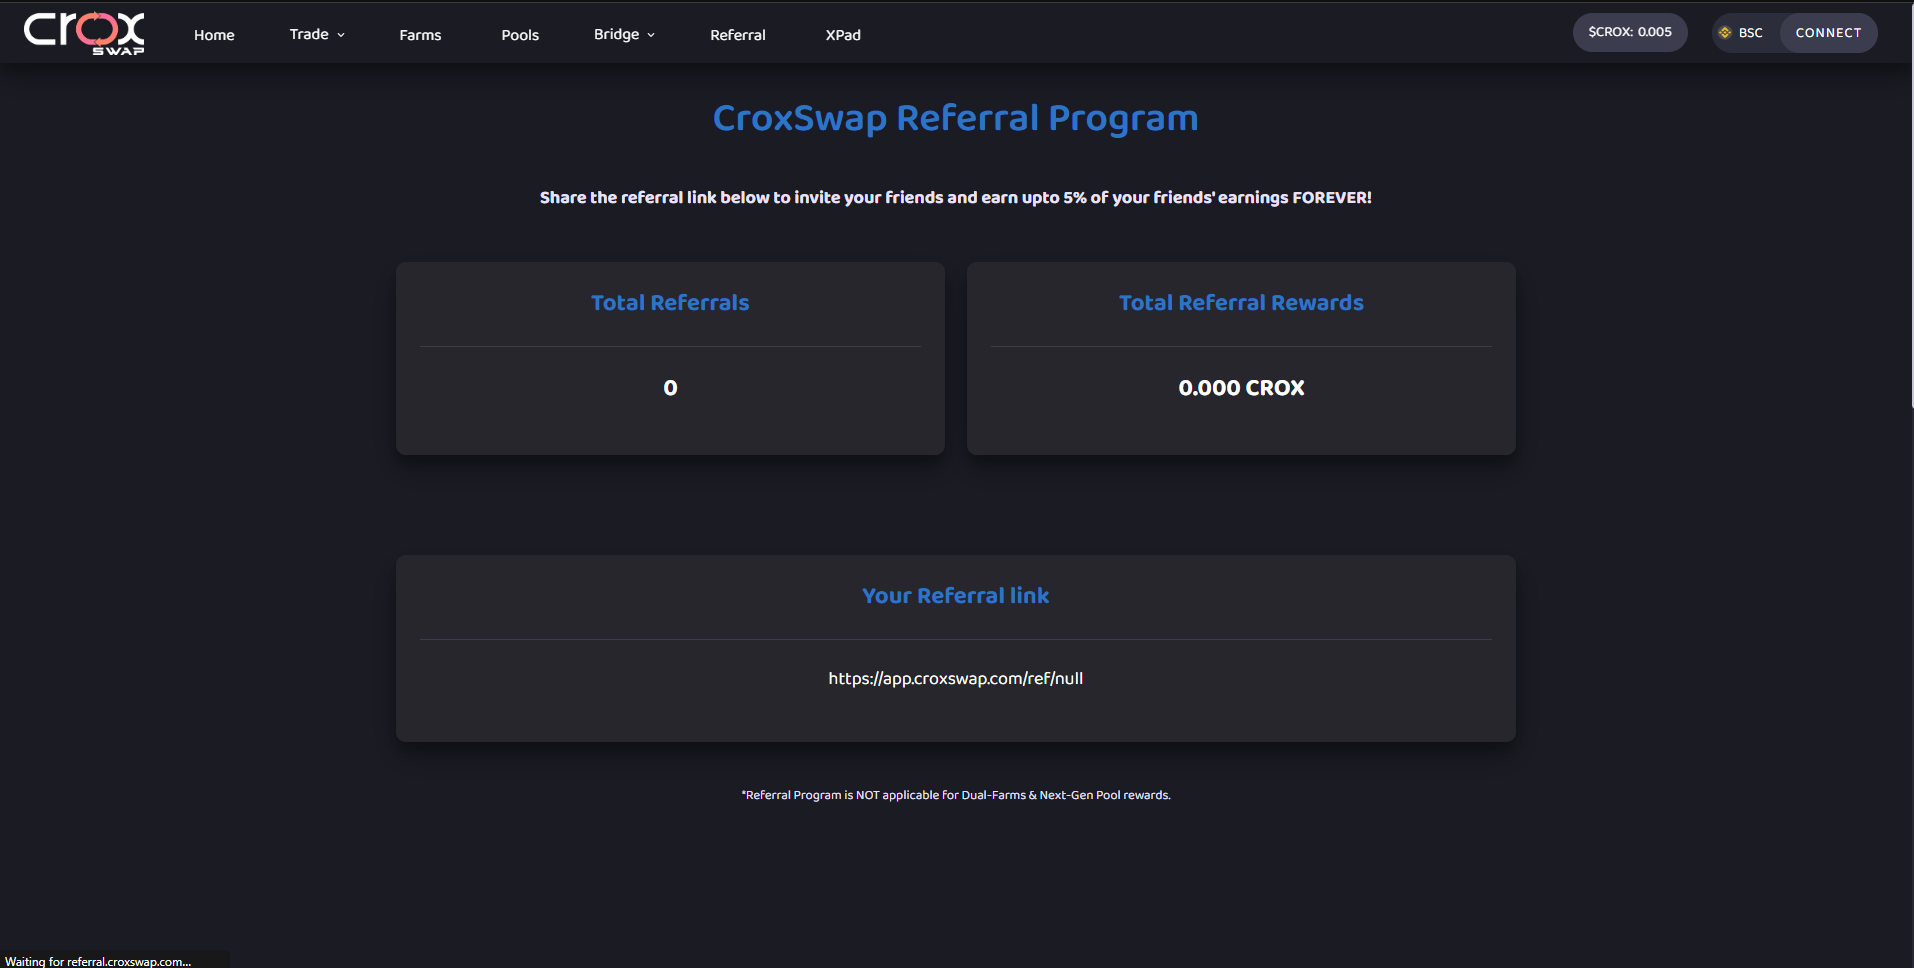 crox

[PPE

Home.

hc Facms Lt Loe LI Lute] ph] Fe CT

CroxSwap Referral Program

Share the referral link below to invite your friends and earn upto 5% of your friends’ earnings FOREVER!

Total Referrals Total Referral Rewards

[J] 0.000 CROX

Your Referral link

httpslappcroxswapcomirefinull

BE RTP

Ex

CONNECT